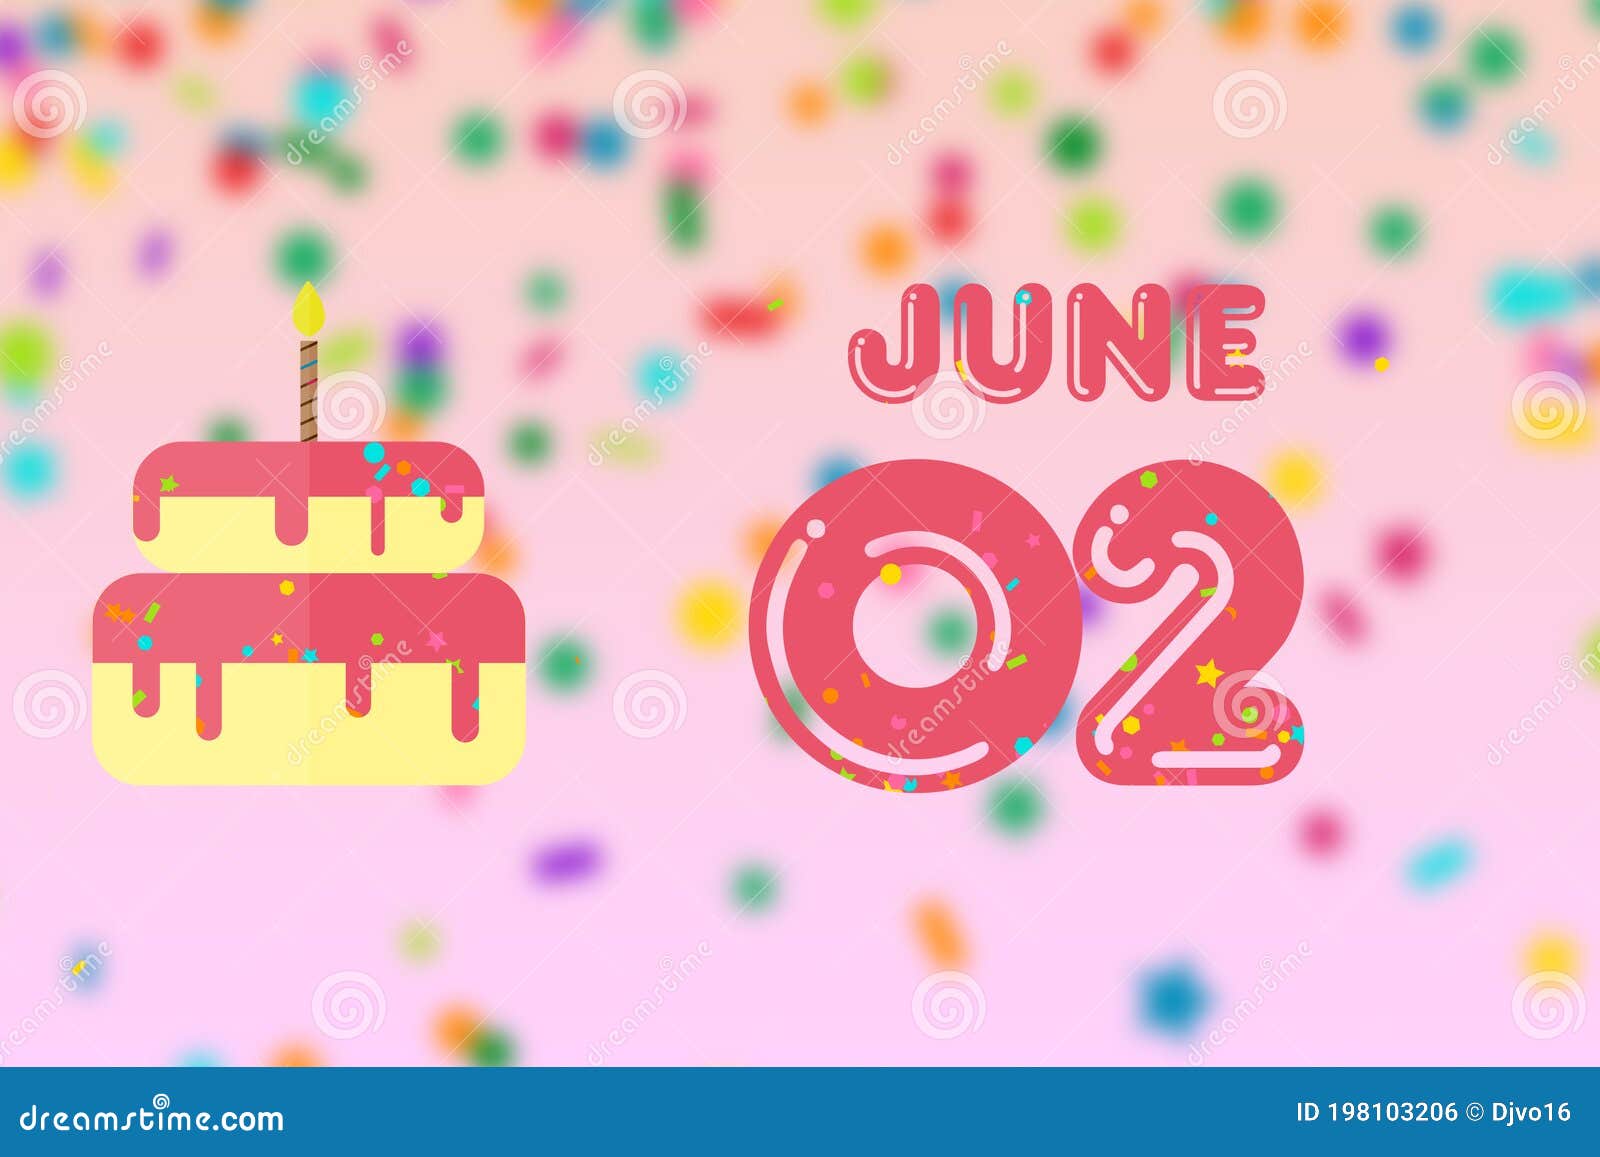 June 2nd. Day 2 of Greeting Card with Date of Birth and Birthday Summer Month, Day of Year Concept Stock Illustration - Illustration of greeting, birthday: 198103206